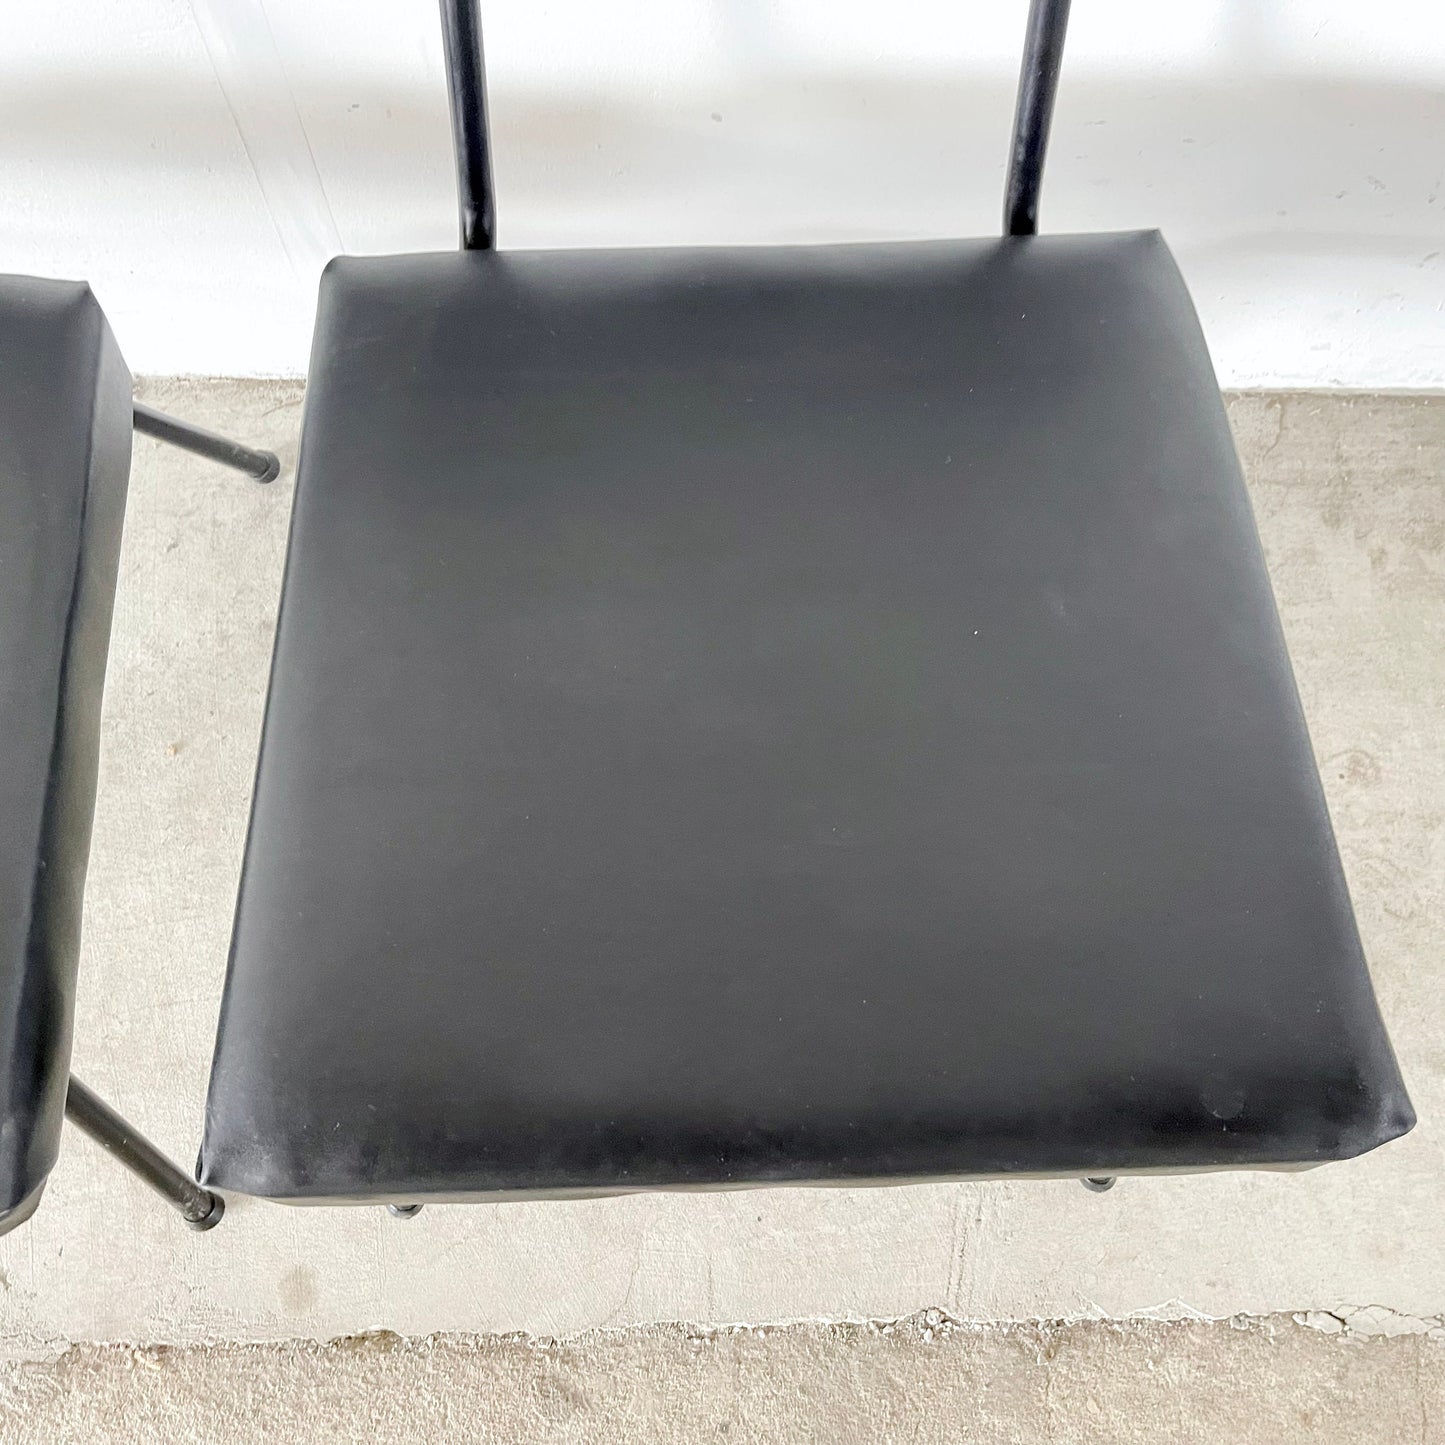 Pair Mid-Century Modern Side Chairs